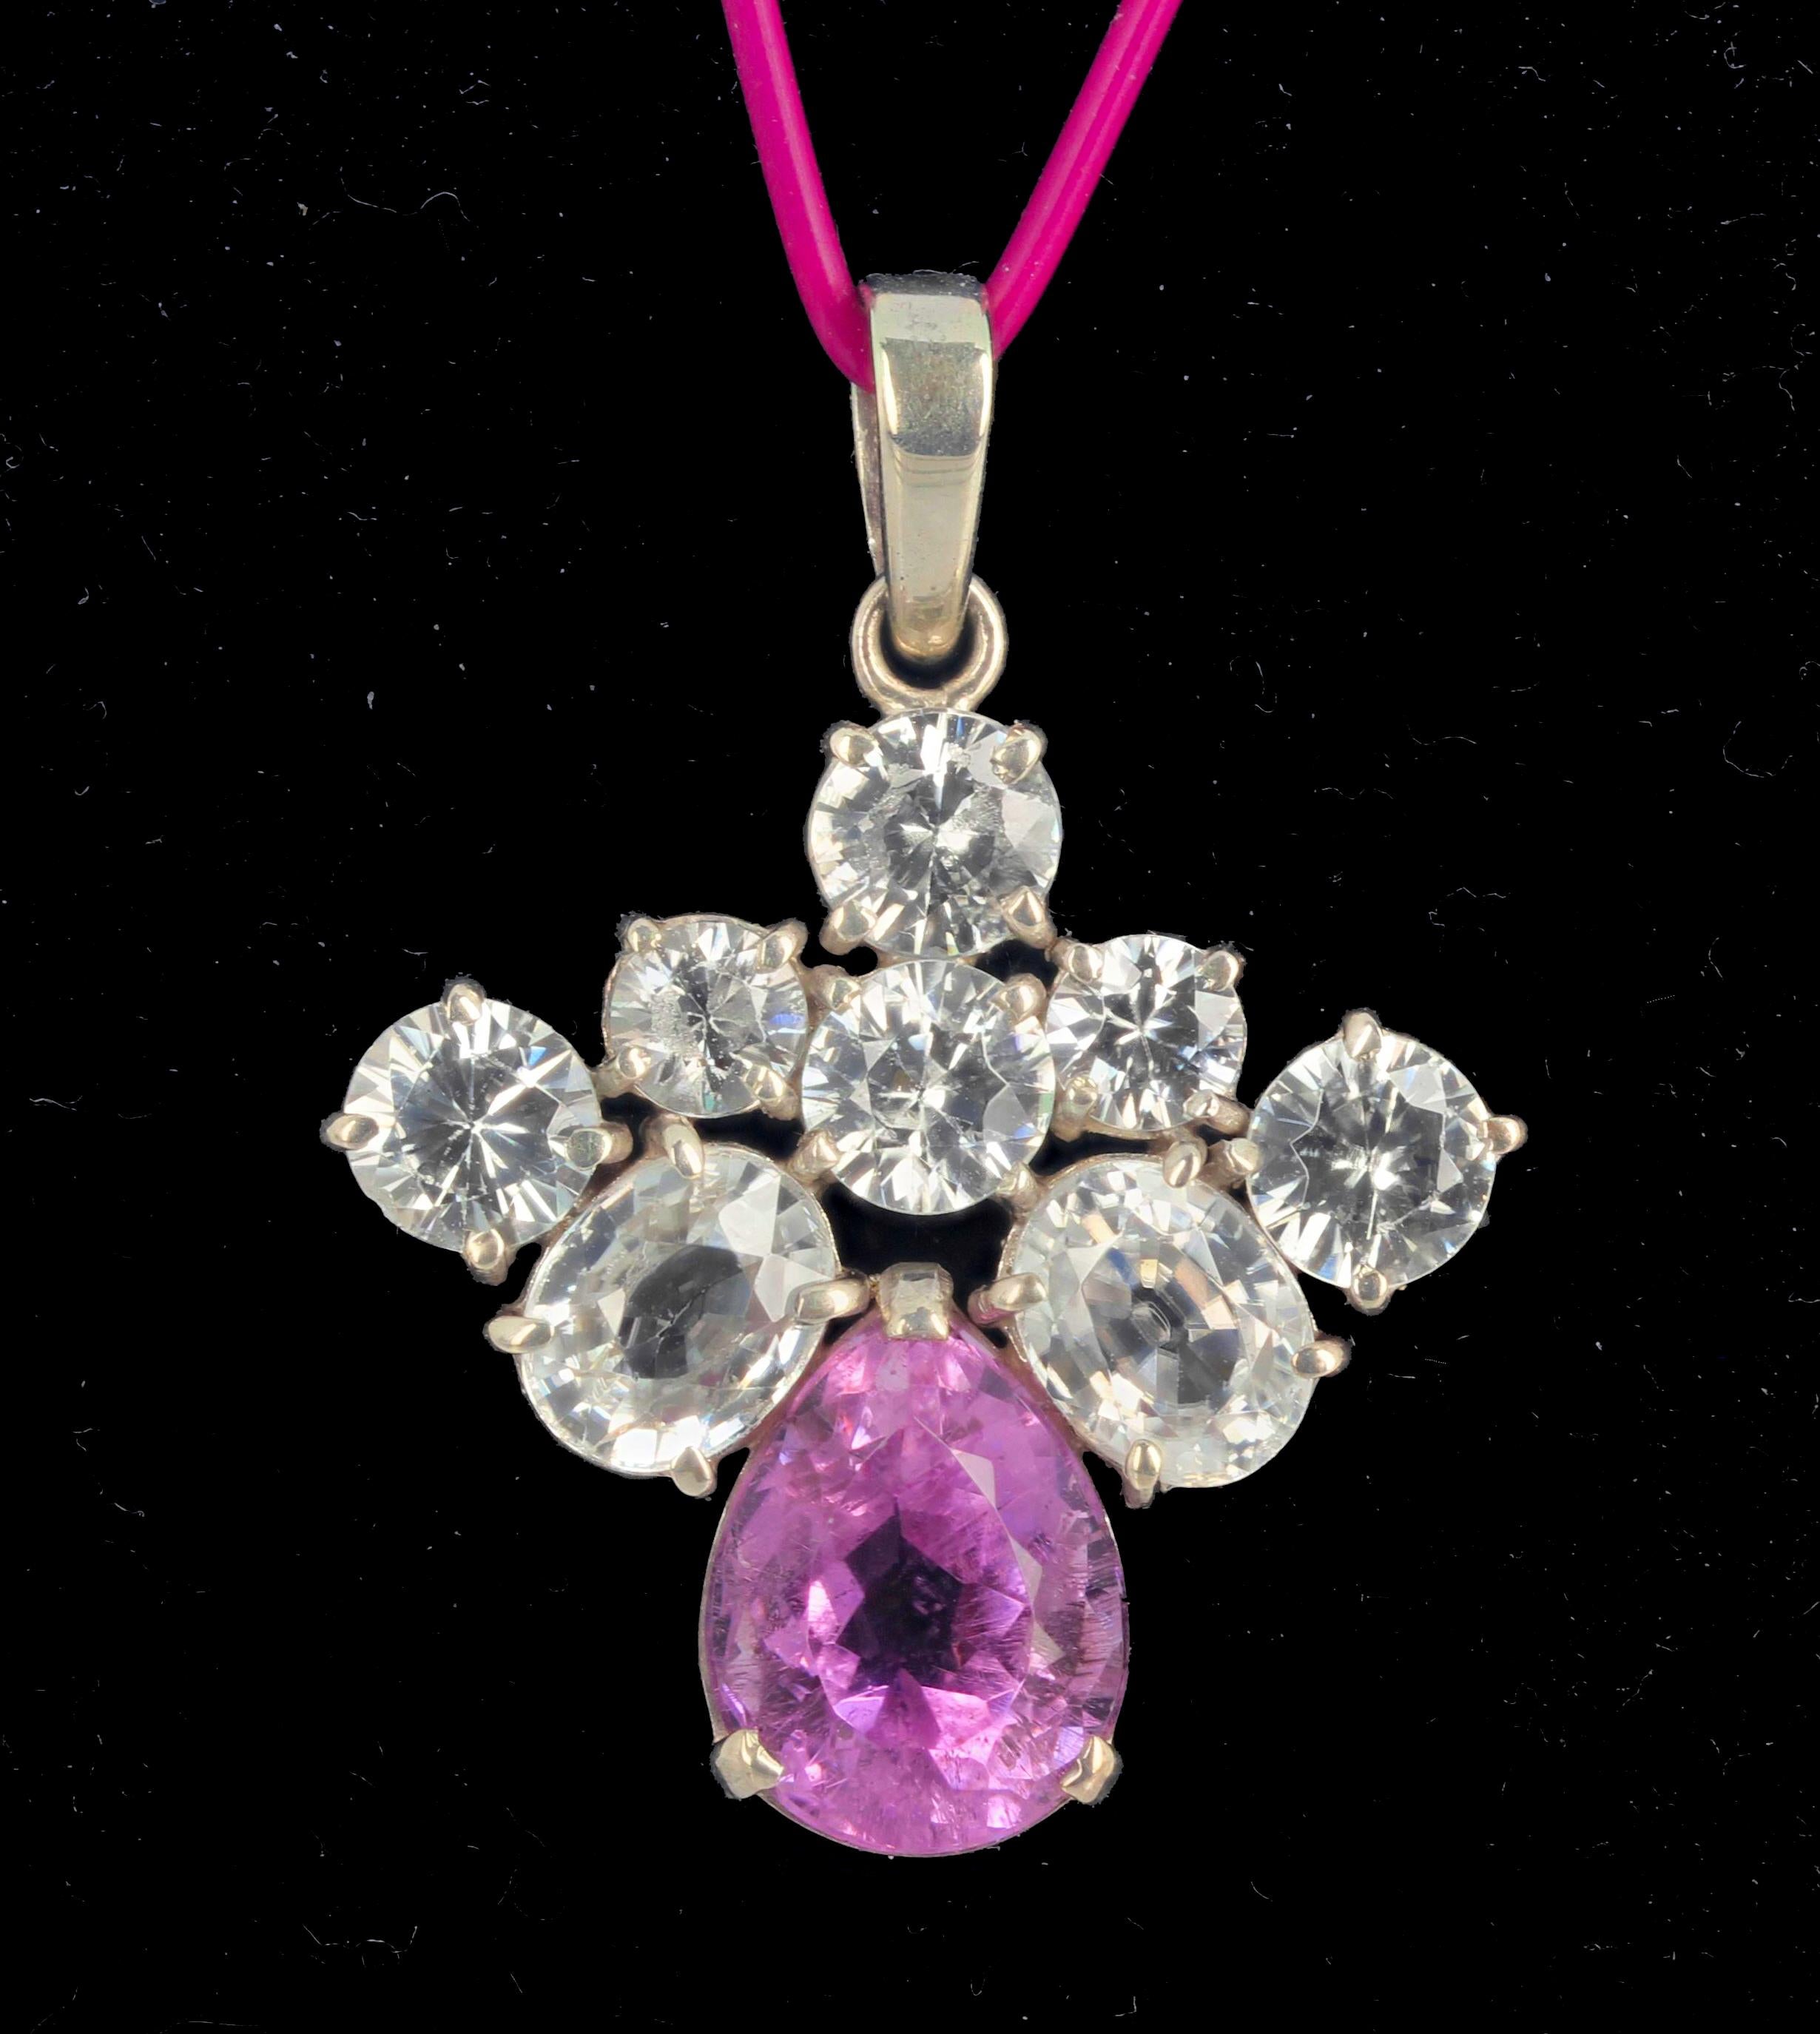 This beautiful 7.6 carat Kunzite is 14.3 mm. x 11 mm and is enhanced by brilliant glittering natural gem cut White Topaz and sits 1 1/2 inches long from top of loop to bottom of Kunzite.   The sparkles are amazing. This was discovered in 1902 by